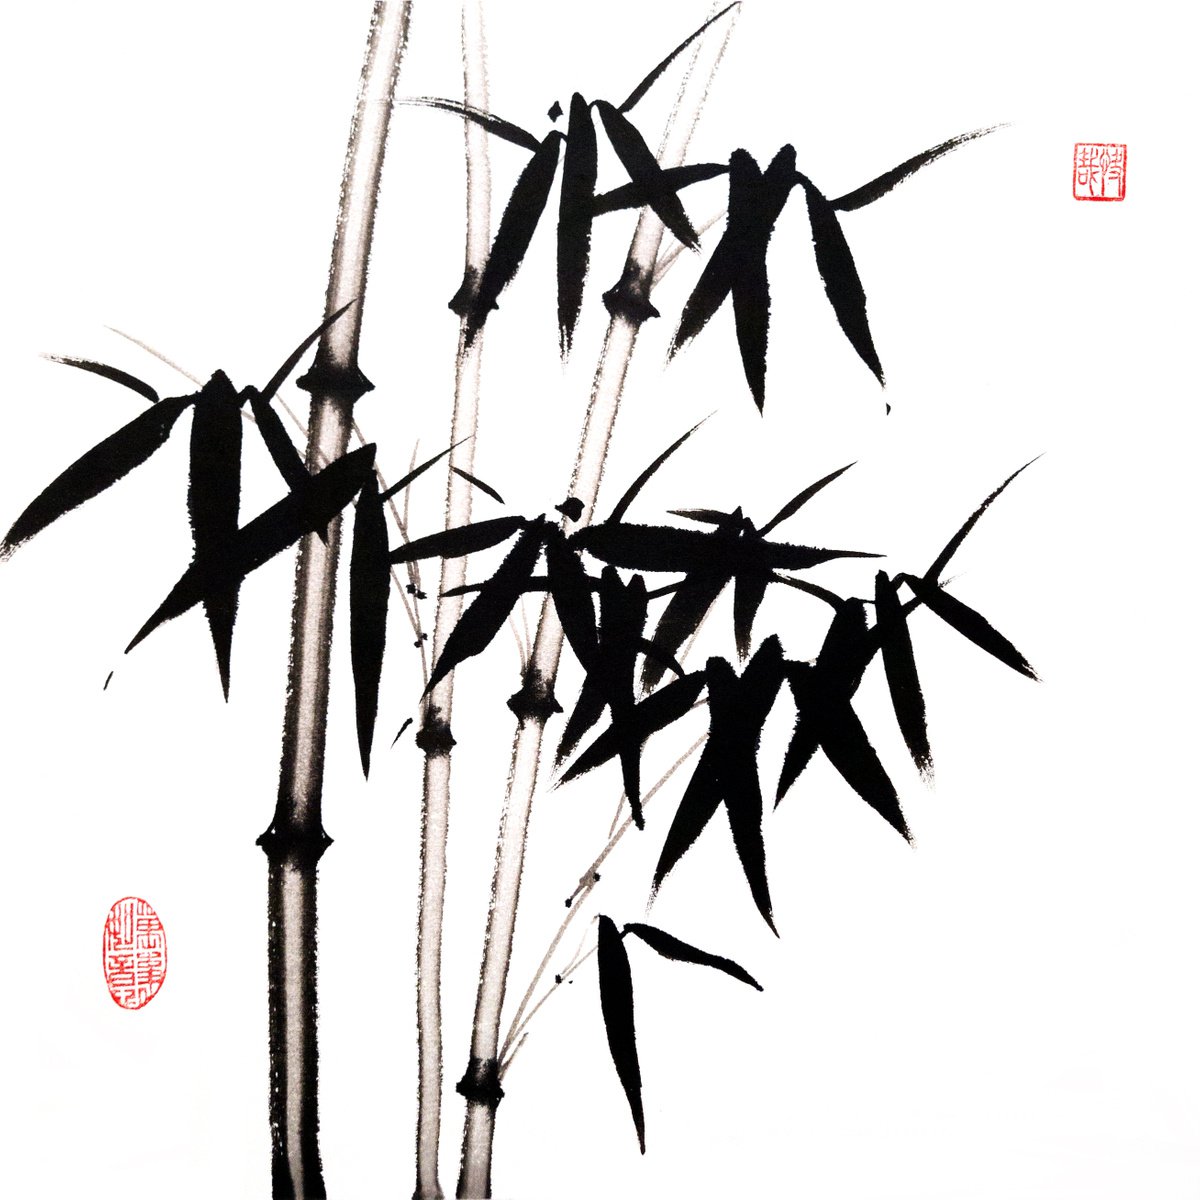 Three trunks of bamboo - Bamboo series No. 2123 - Oriental Chinese Ink Painting by Ilana Shechter